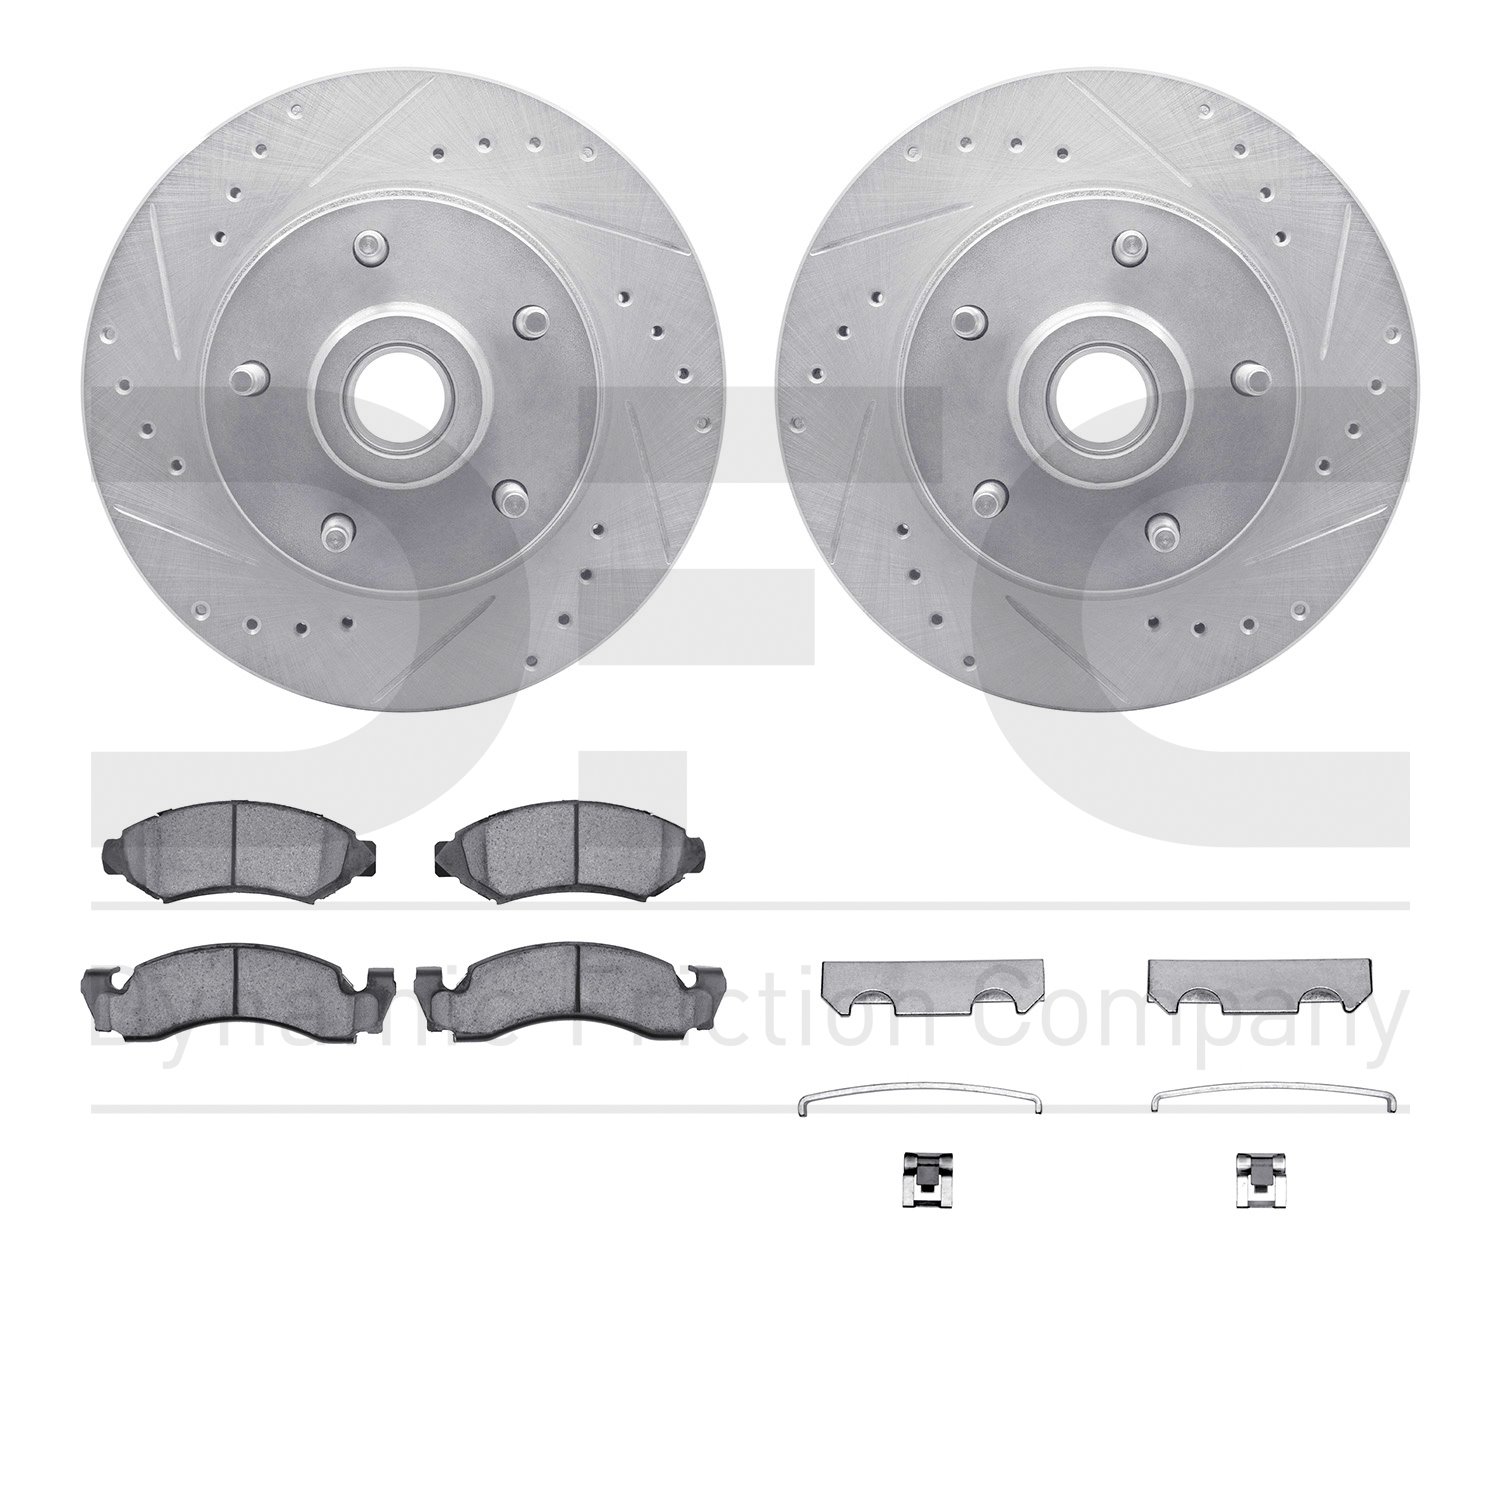 7412-54001 Drilled/Slotted Brake Rotors with Ultimate-Duty Brake Pads Kit & Hardware [Silver], 1973-1973 Ford/Lincoln/Mercury/Ma